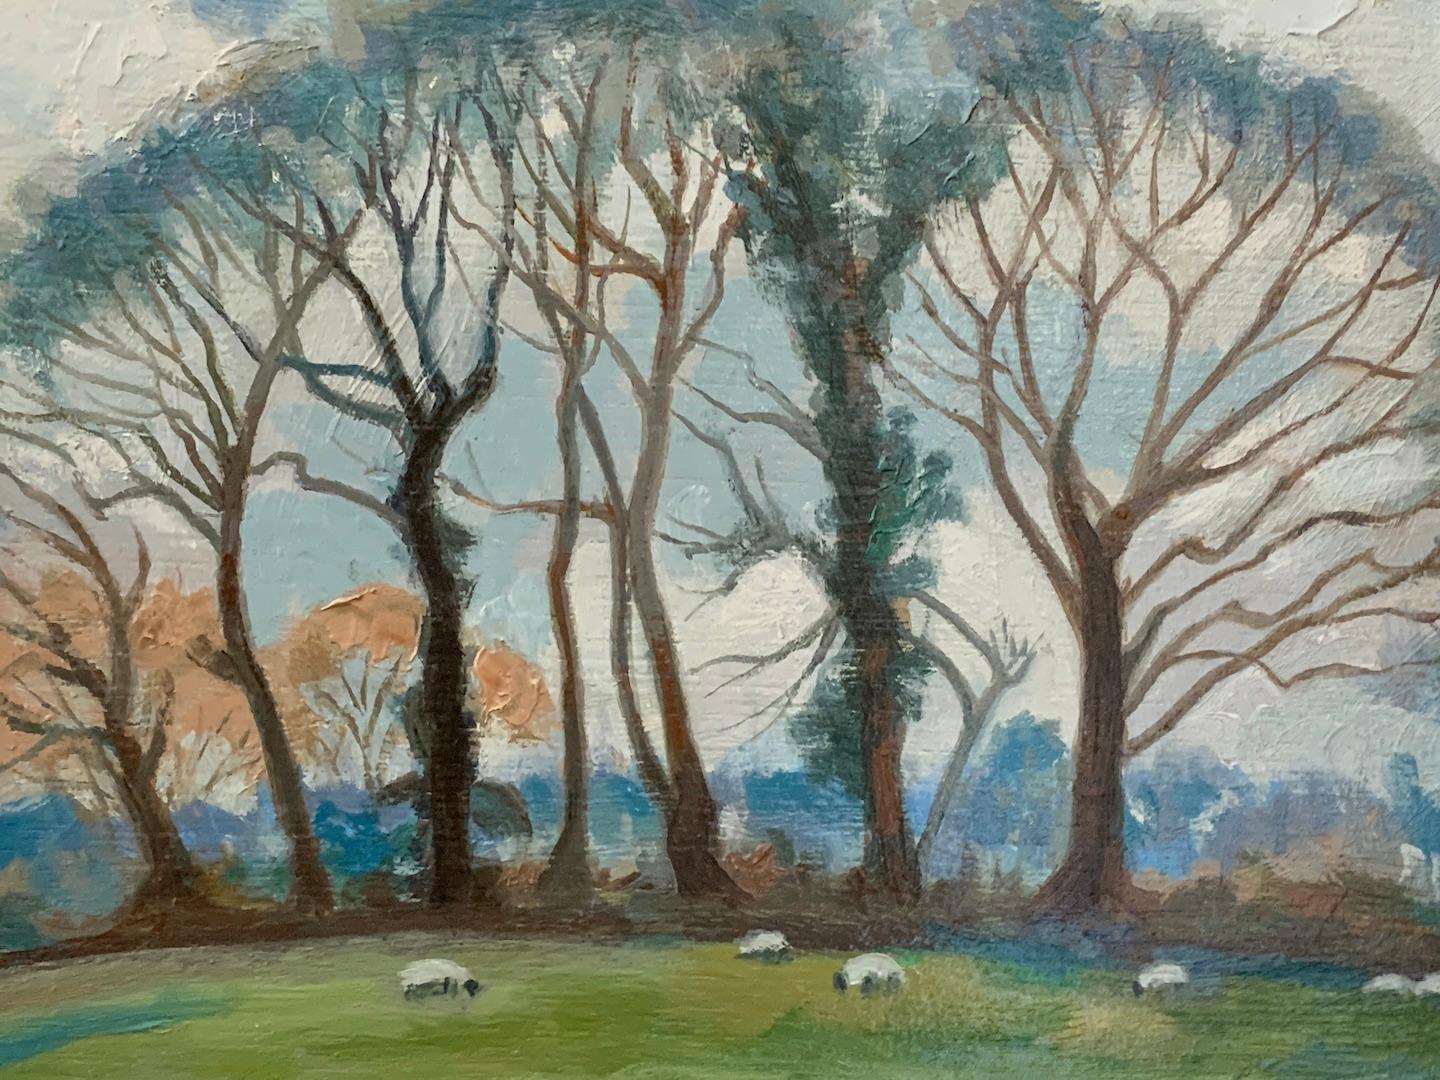 modern British Landscape with fields, trees and sheep grazing - Painting by Anthony Procter